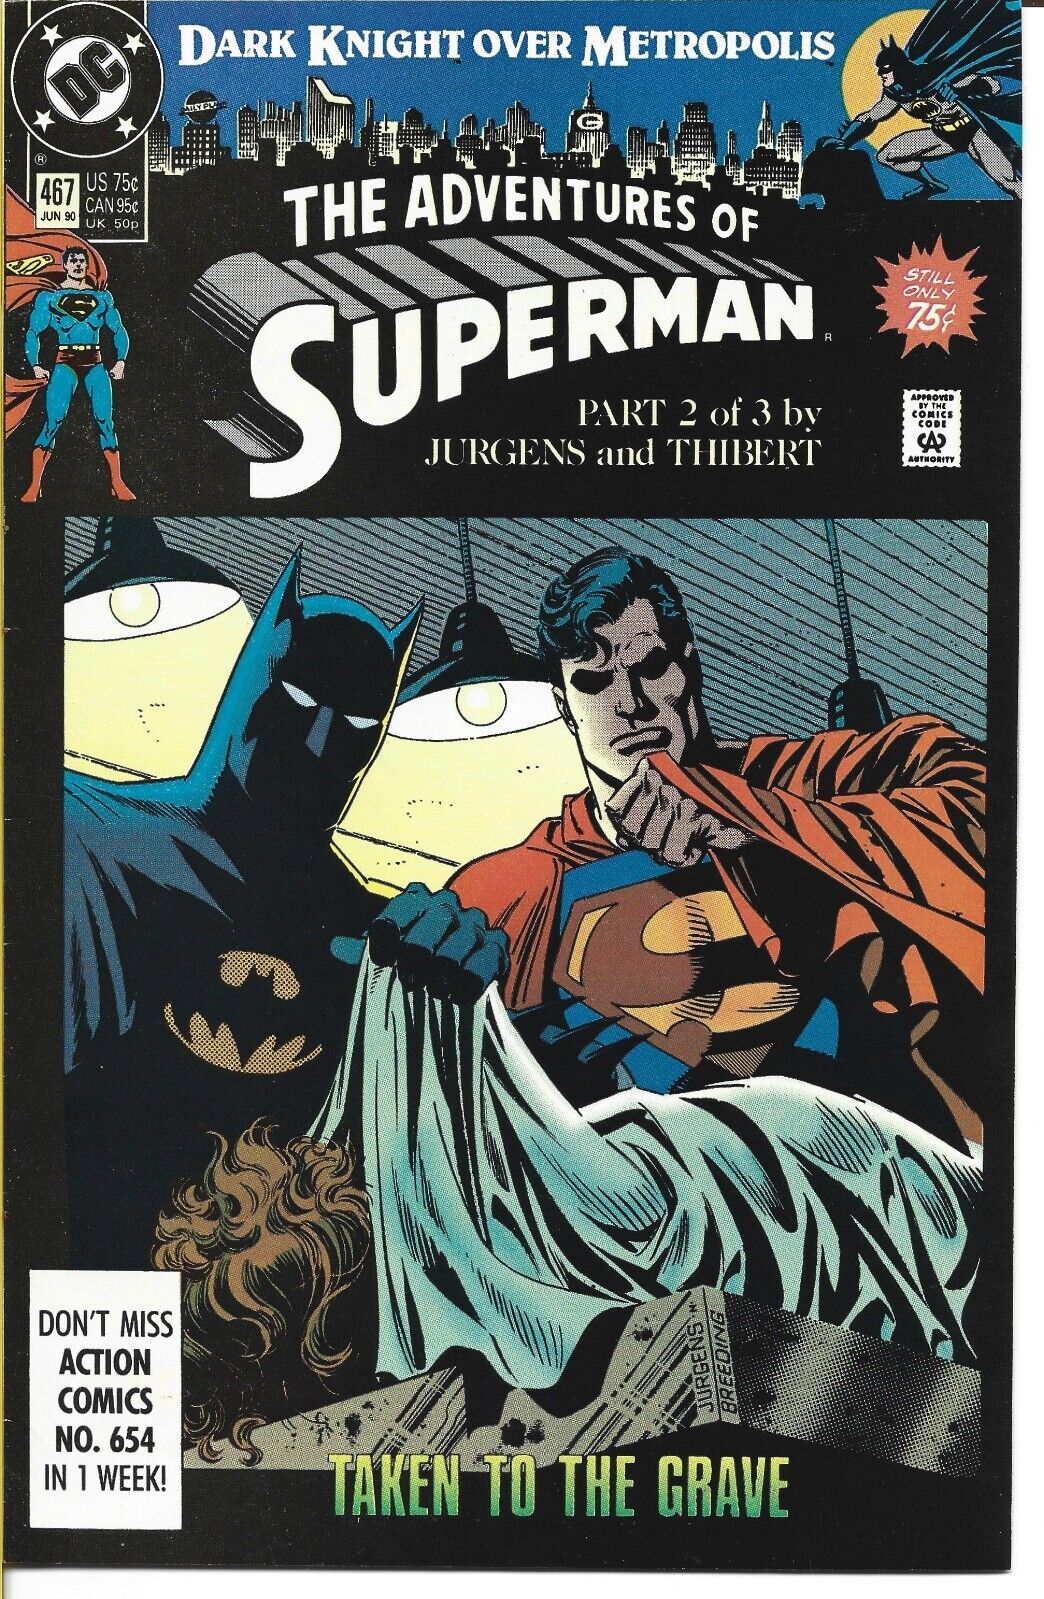 THE ADVENTURES OF SUPERMAN #467 DC COMICS 1990 BAGGED AND BOARDED